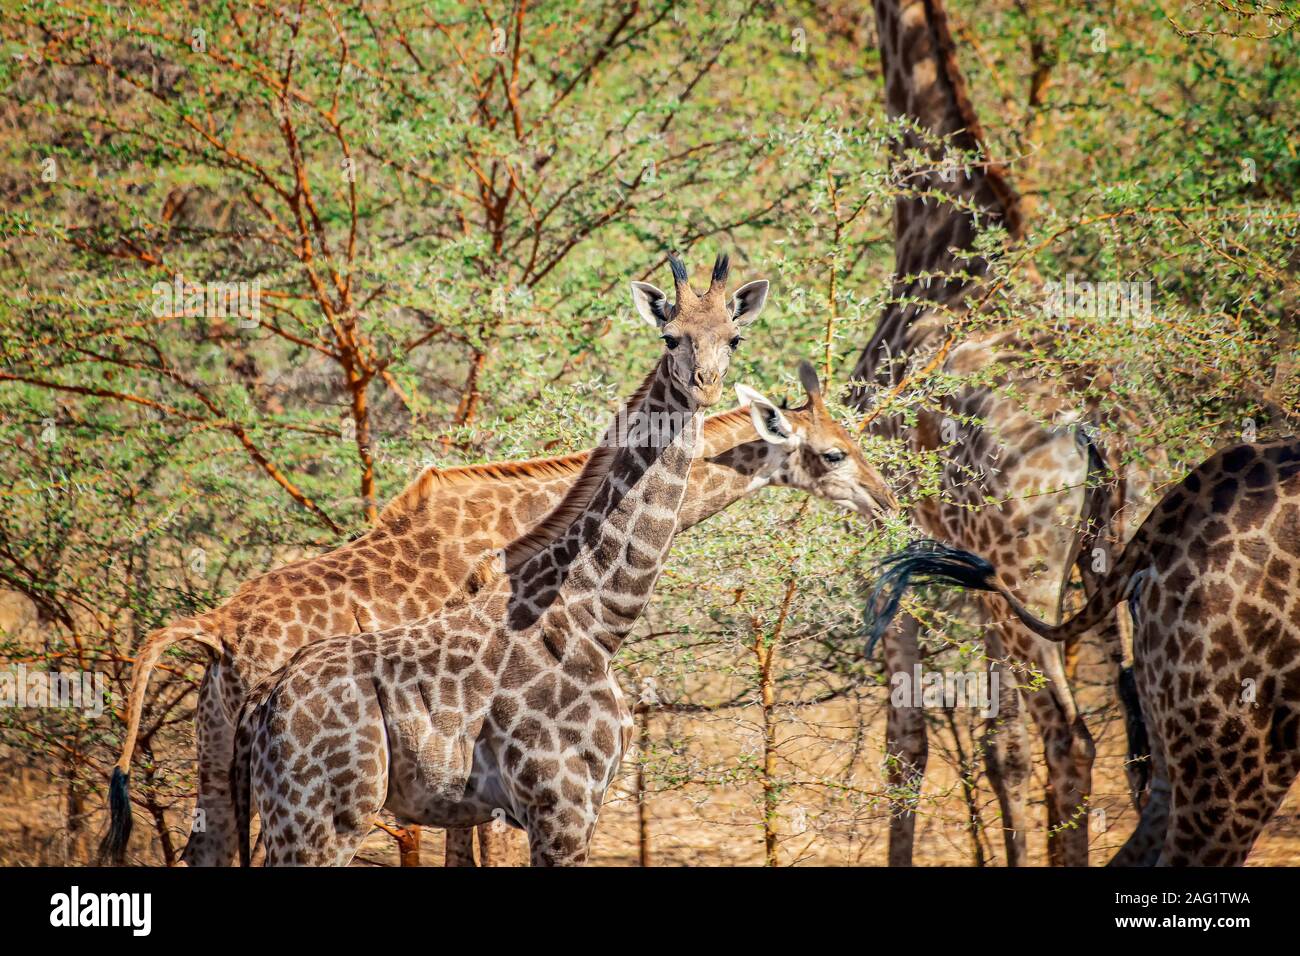 Baby of giraffe, Giraffa camelopardalis reticulata in Bandia reserve, Senegal. It is close up wildlife photo of animal in Africa. There are adult gira Stock Photo